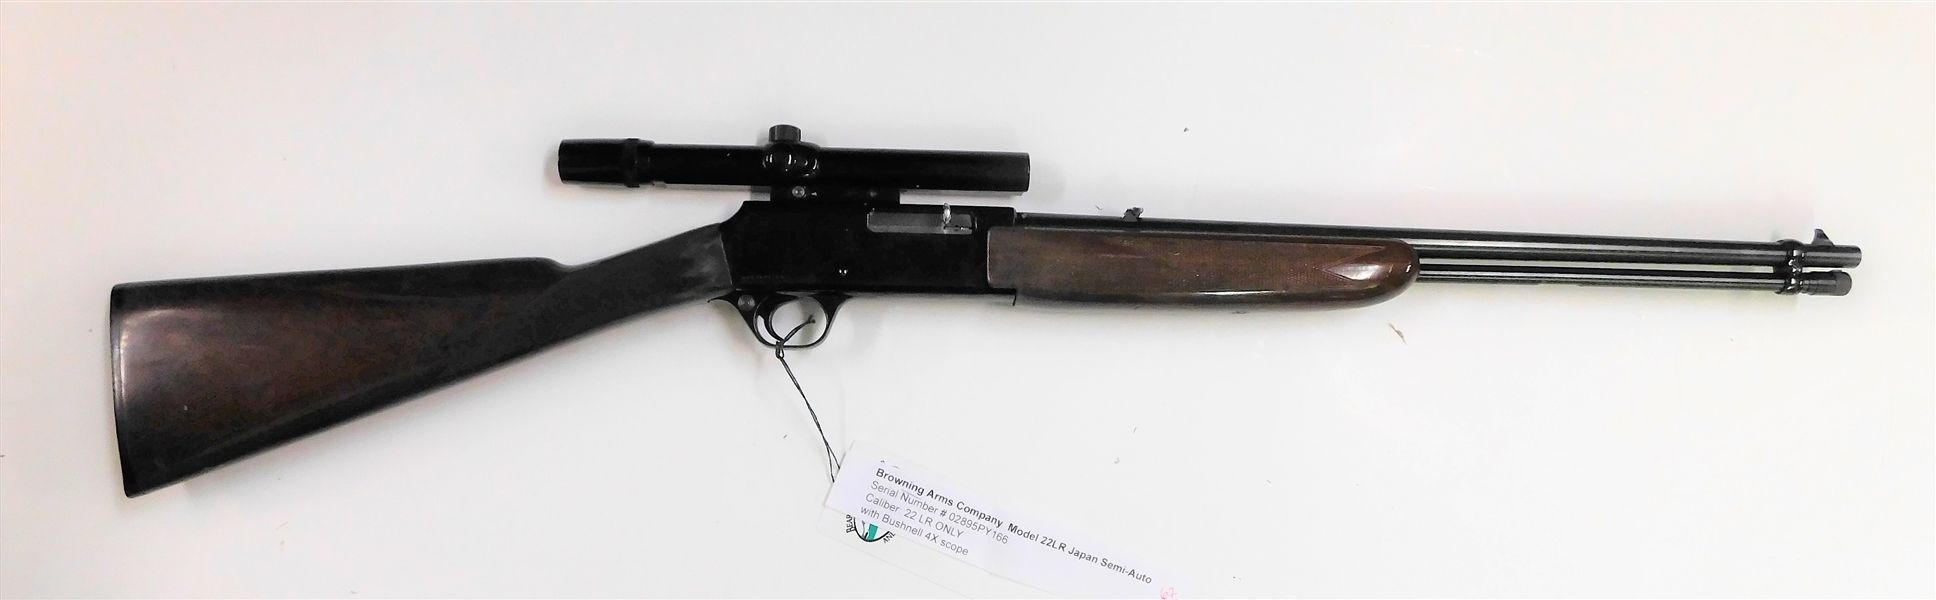 Browning Arms Company Model 22LR Japanese Semi Automatic Rifle with Bushnell 4X Scope